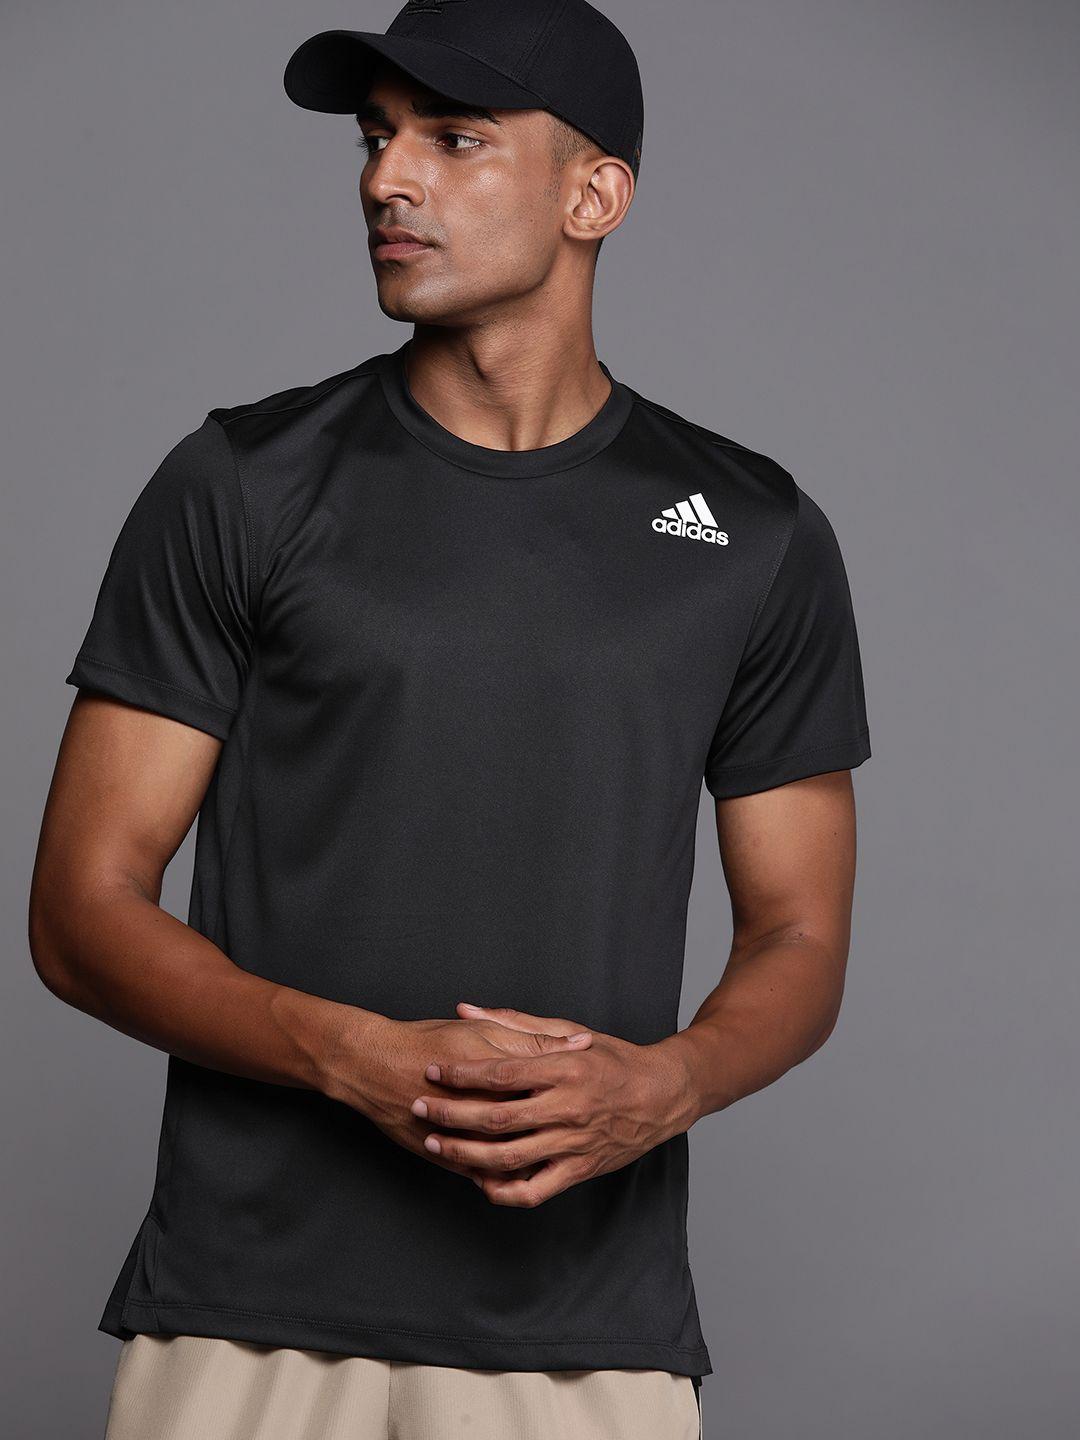 adidas men sustainable in smu am t-shirt